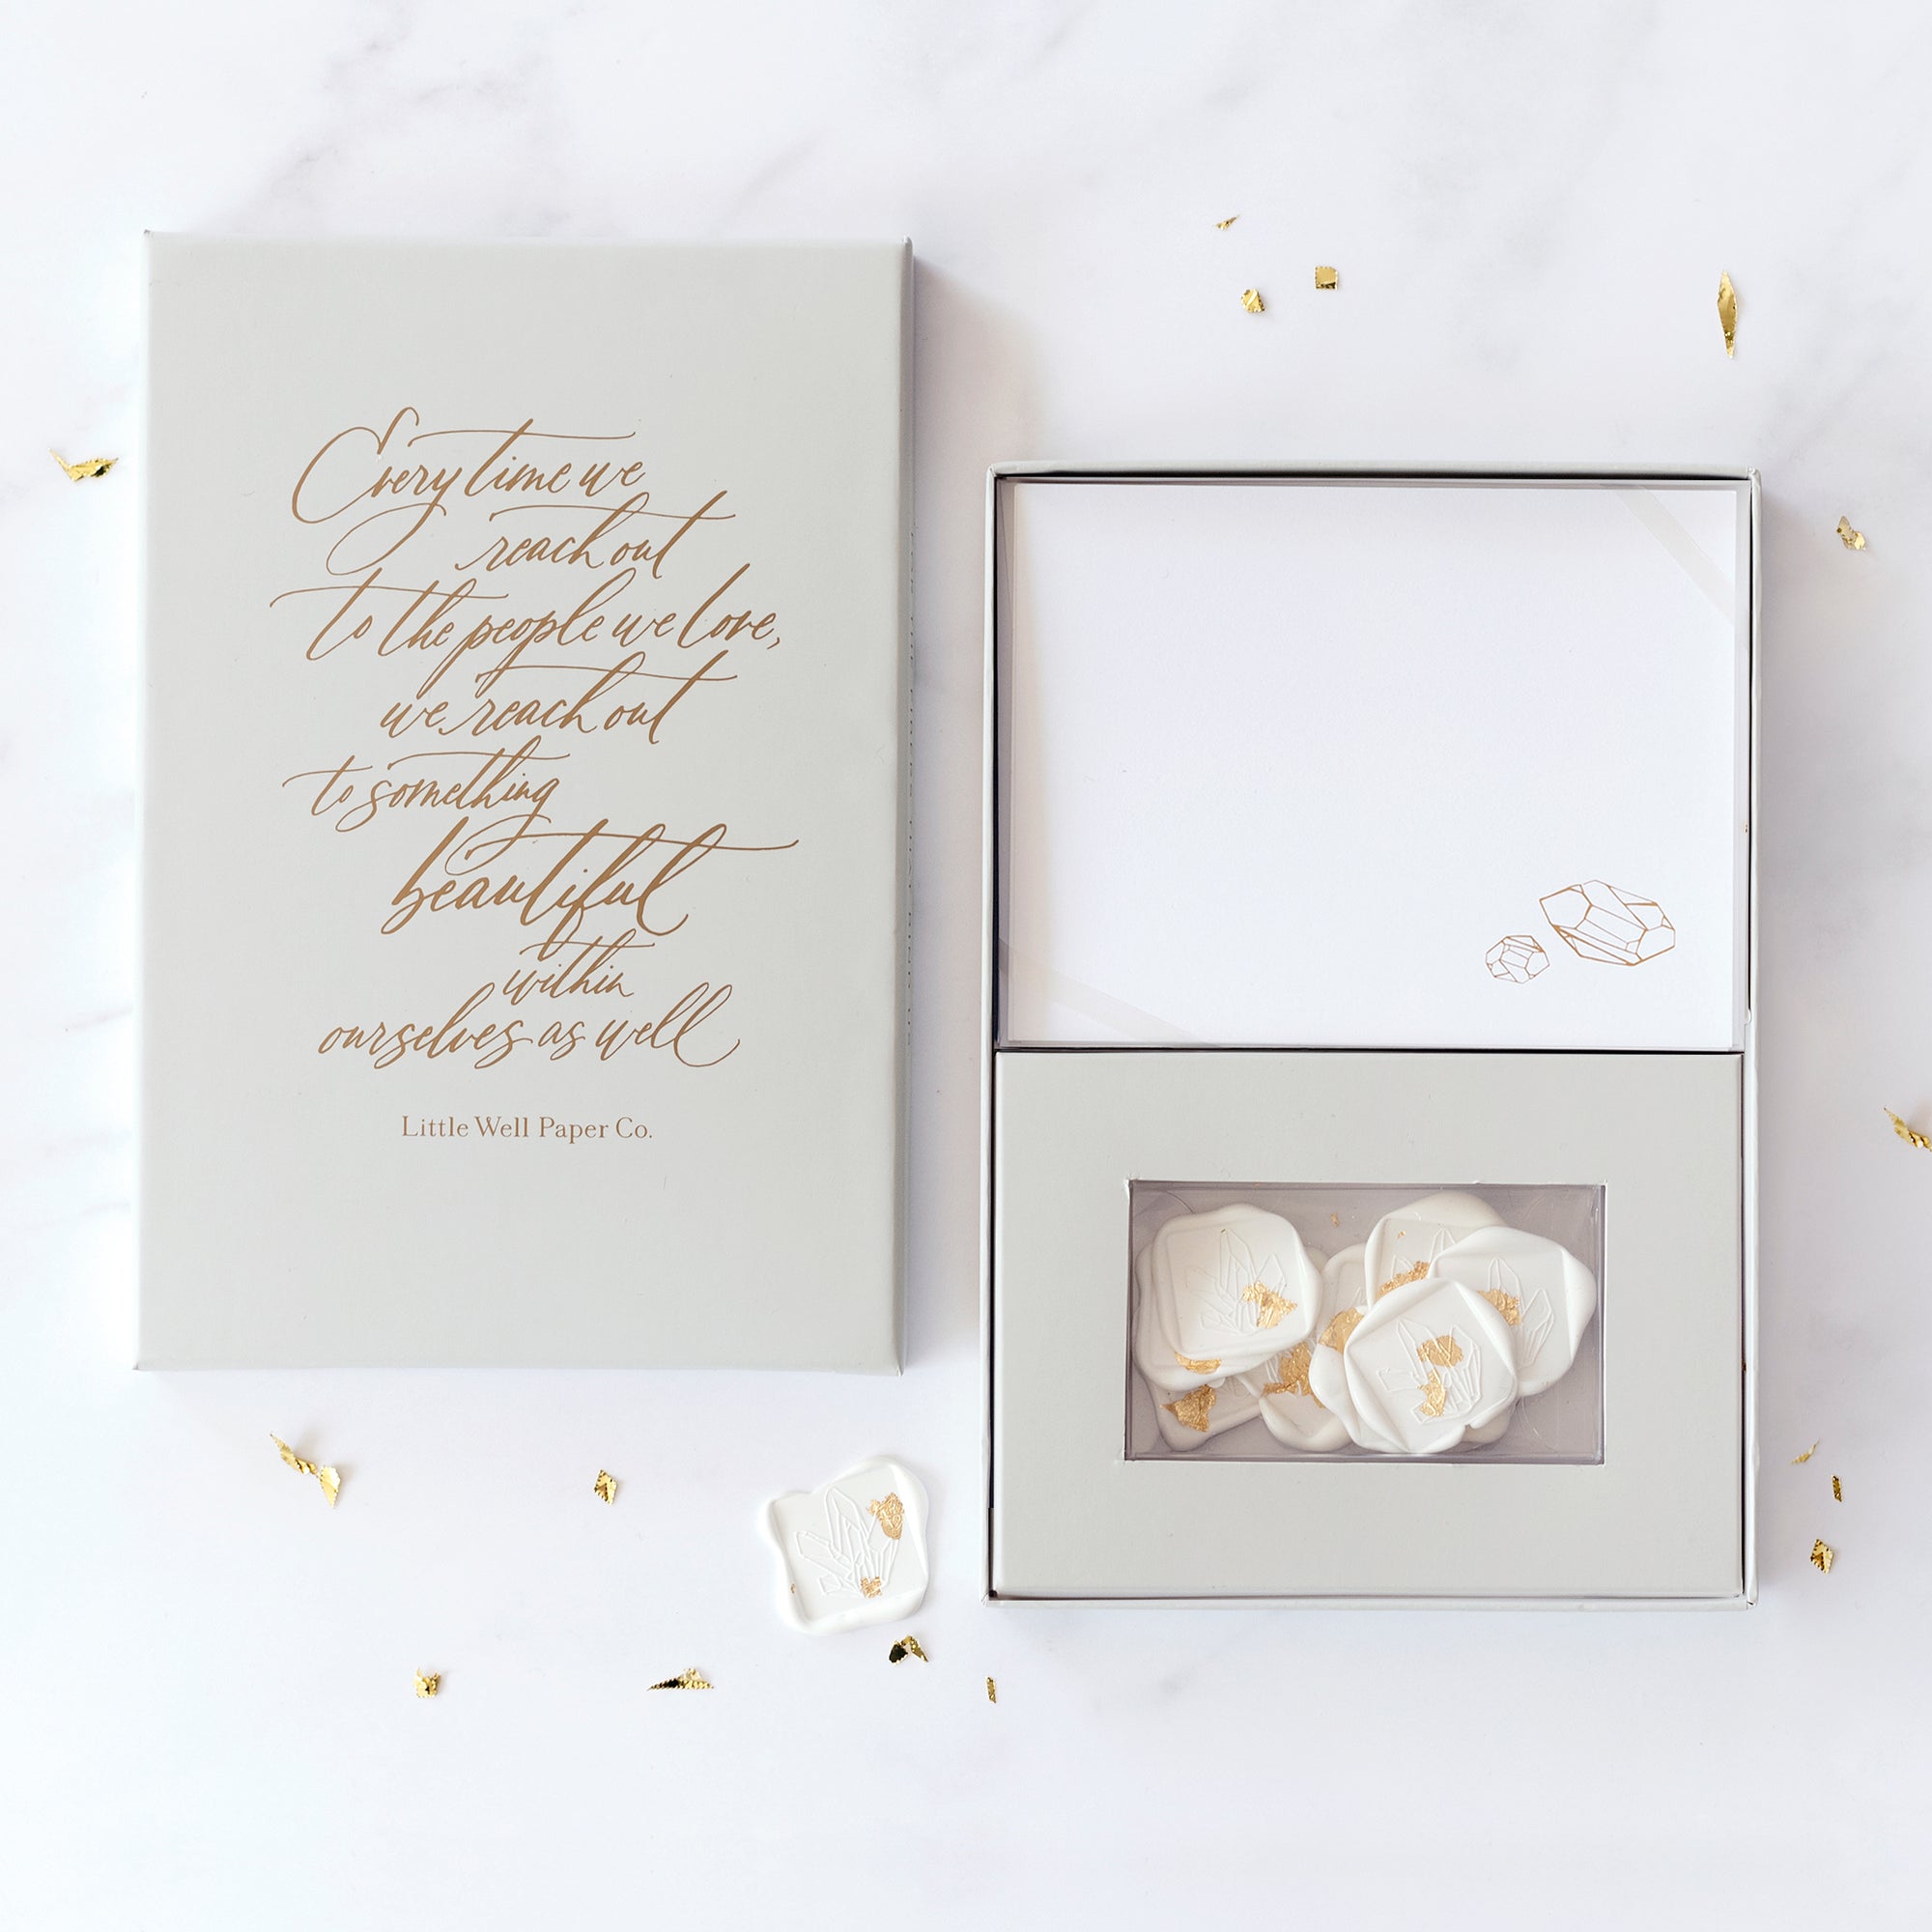 Our "Gemstone" flat note stationery set includes a set of 6 foil printed cards and envelopes with 6 professional grade, self adhesive wax seals.